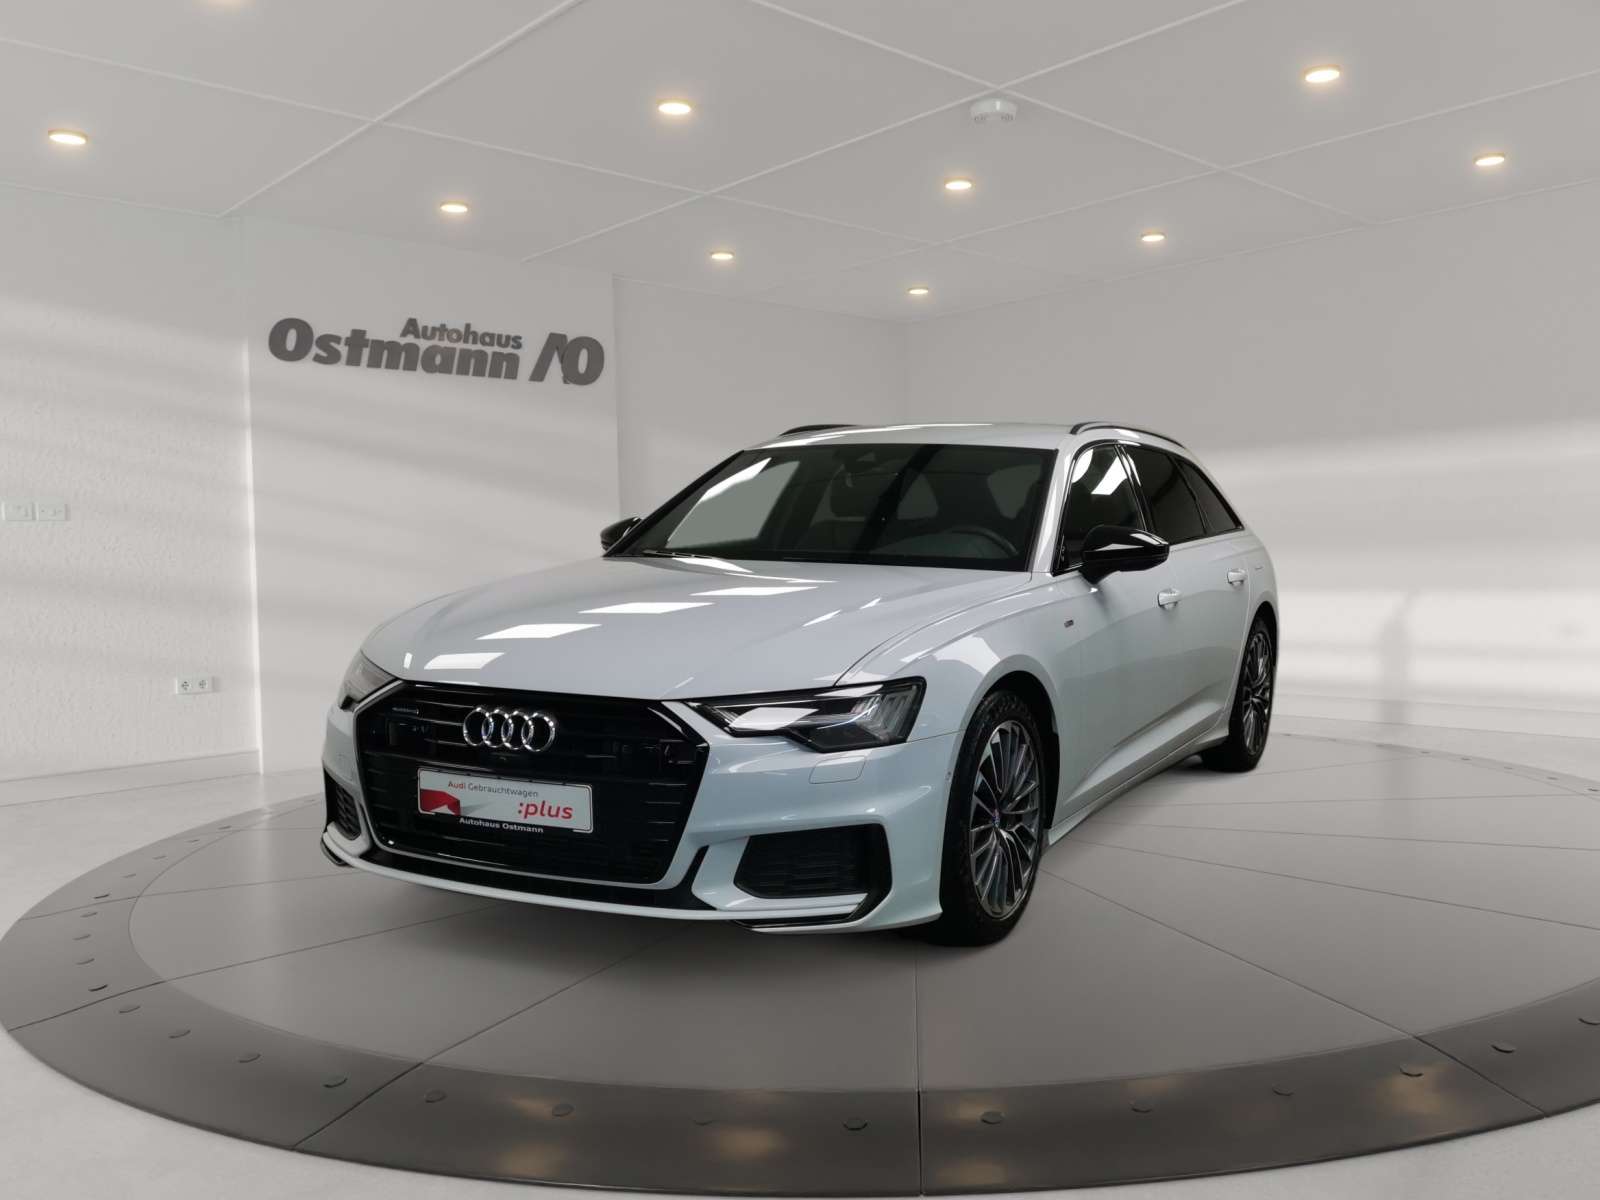 Audi A6 Station wagon in White used in Wolfhagen for € 99,999.-